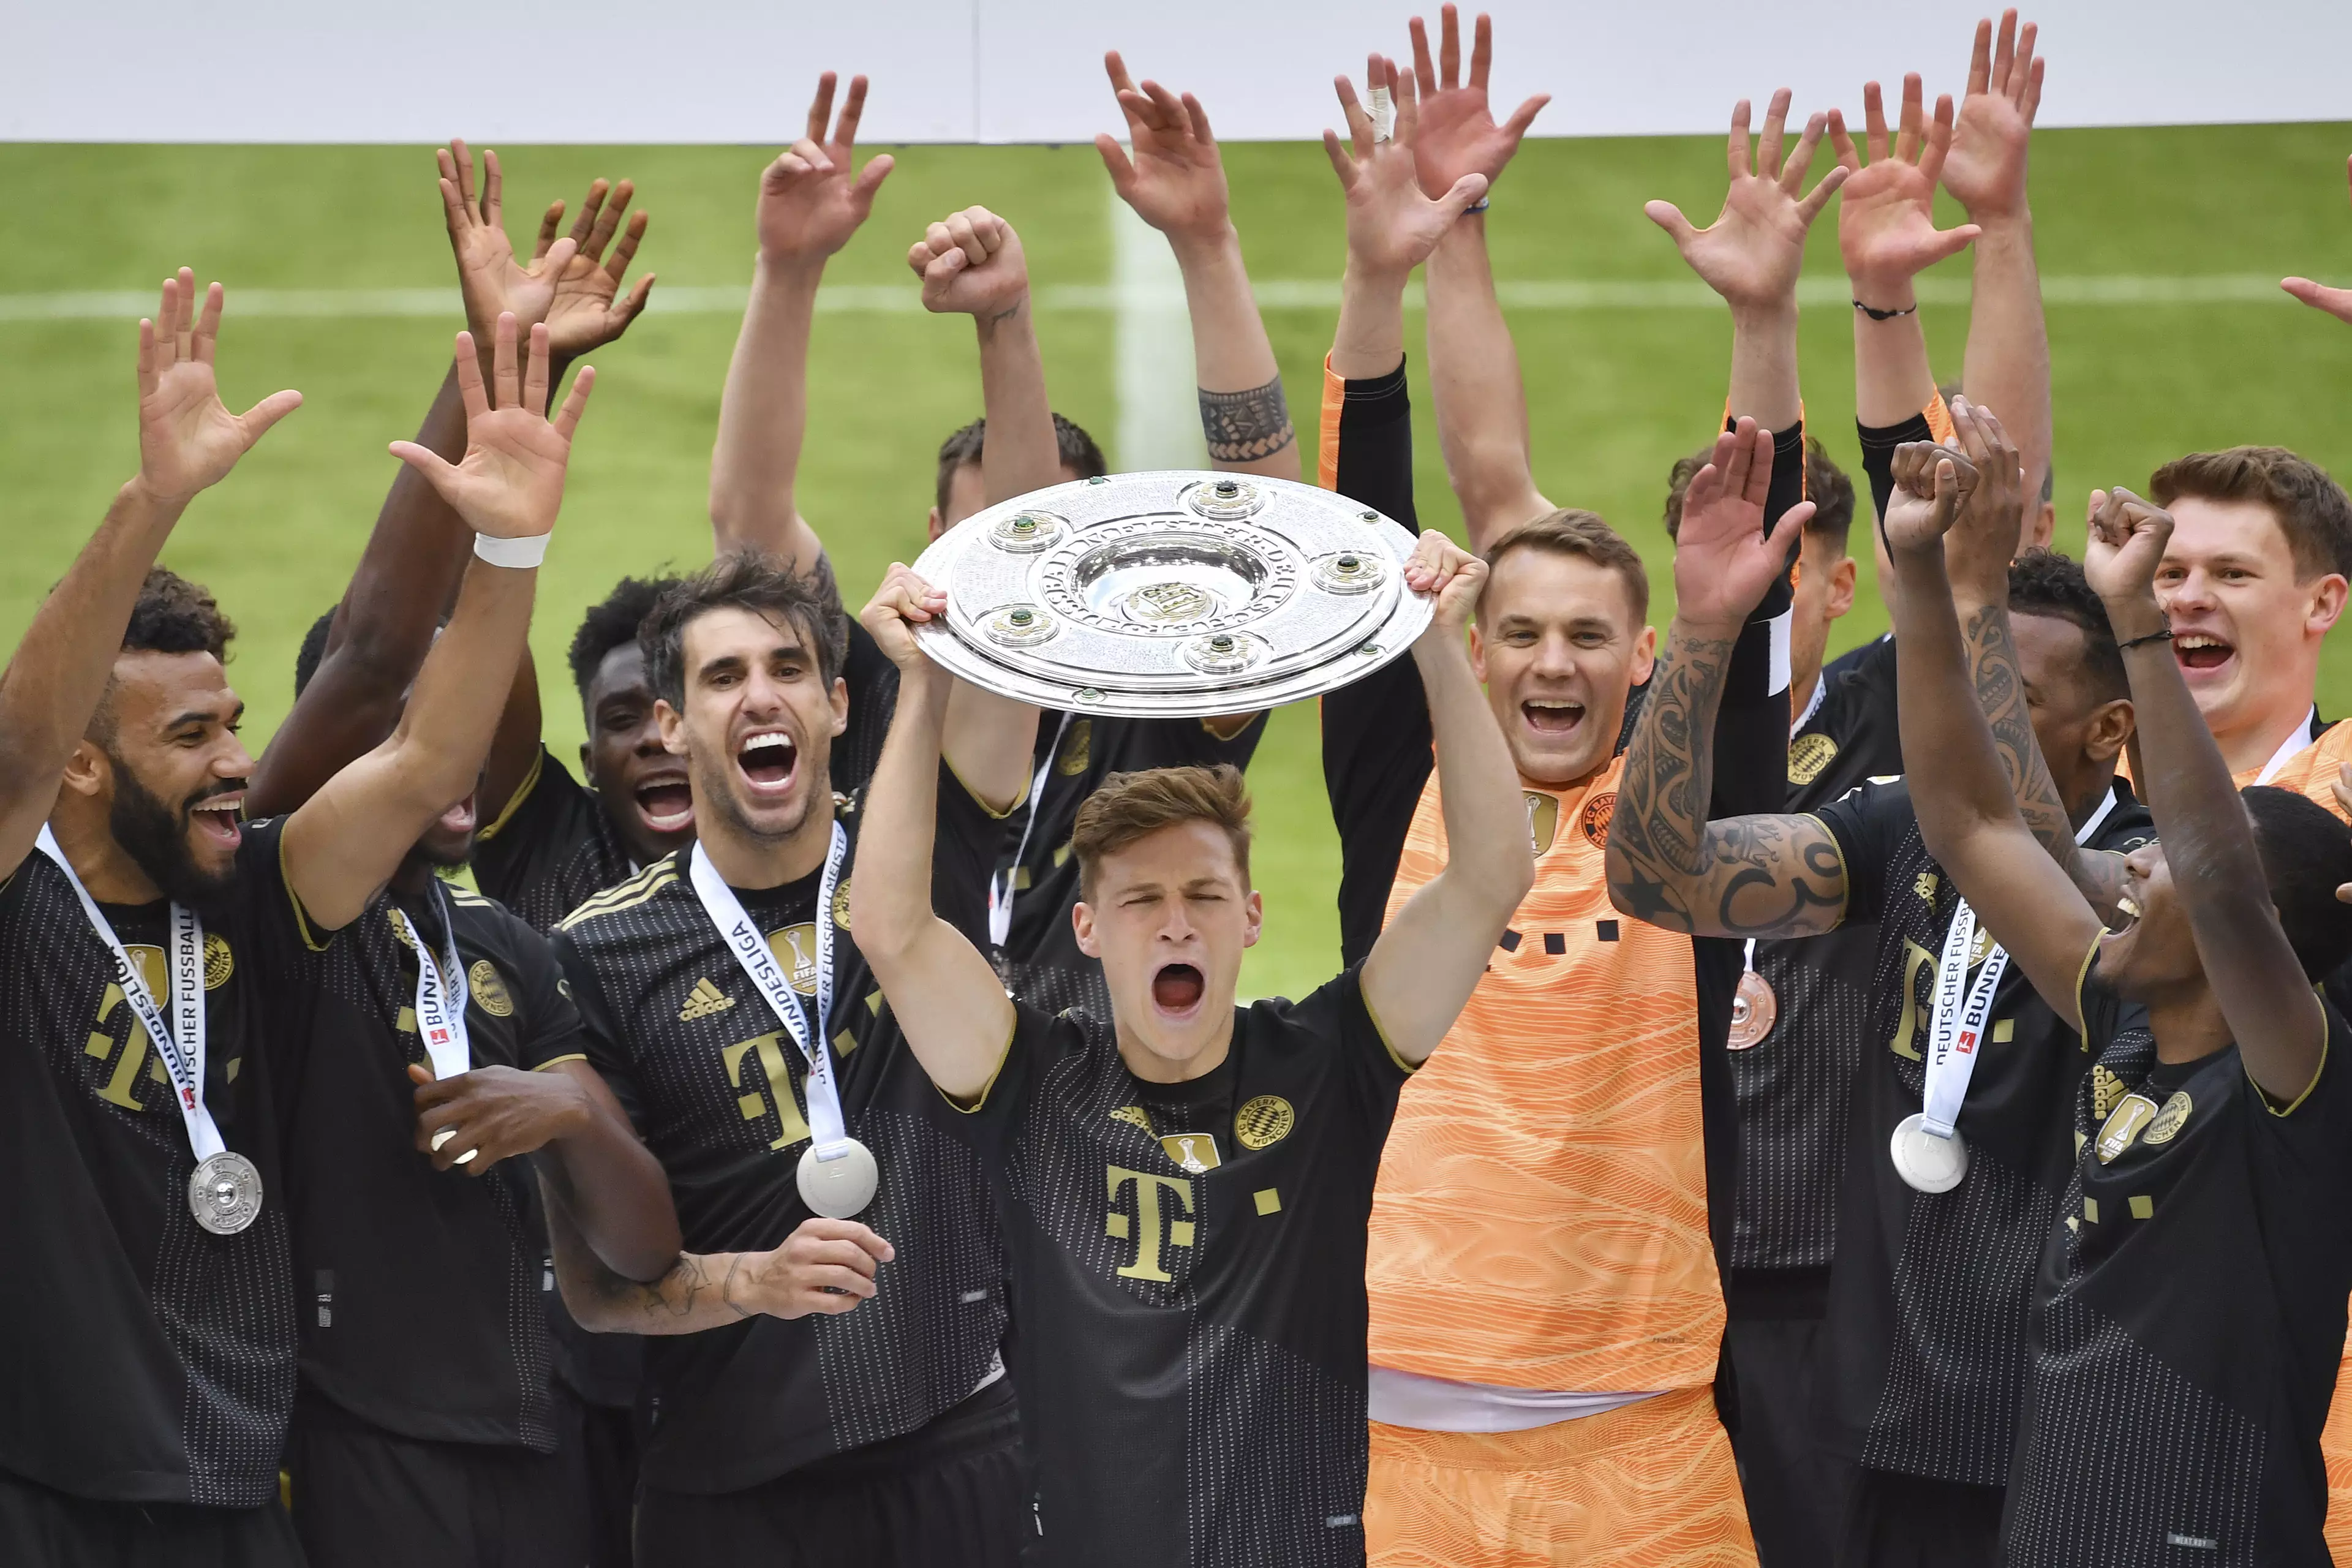 Kimmich lifts the Bundesliga title. Image: PA Images